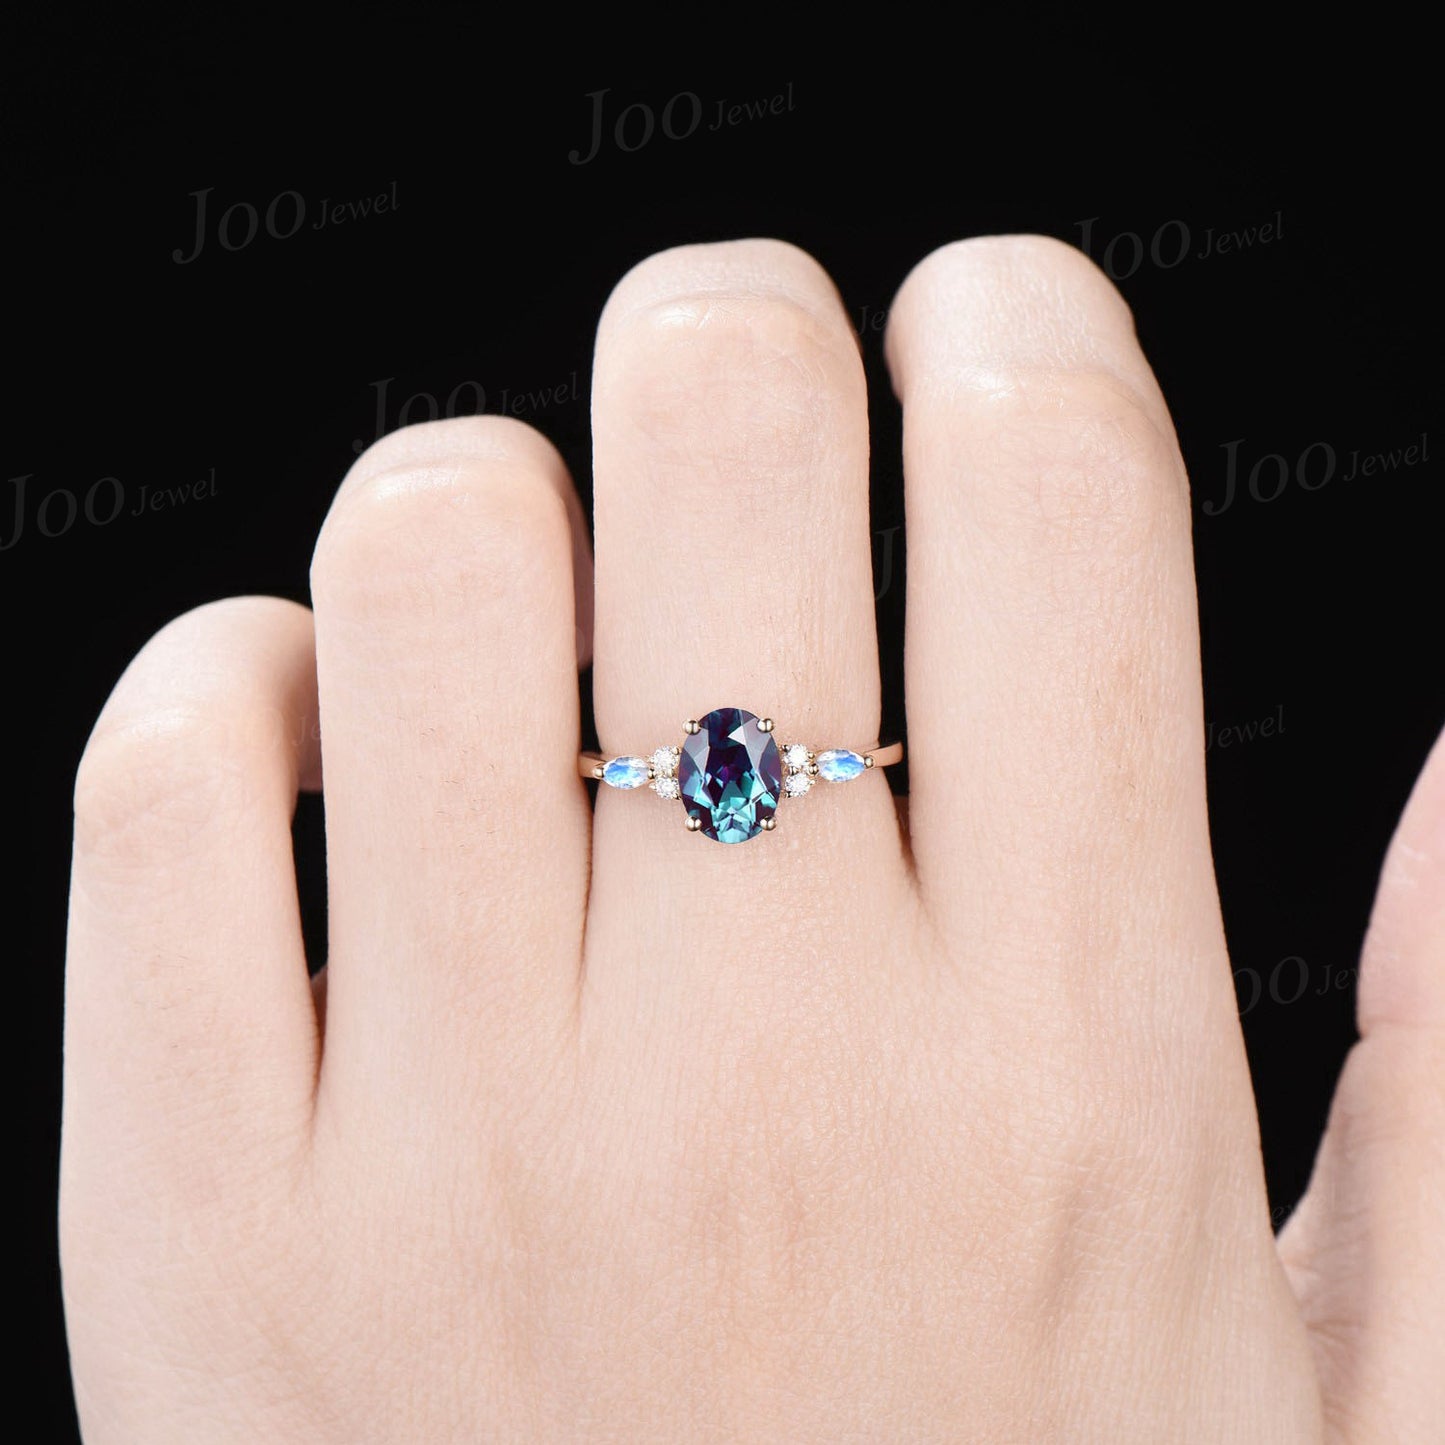 1.5ct Oval Alexandrite Ring Moonstone Cluster Engagement Ring Rose Gold June Birthstone Color Change Stone Unique Wedding Anniversary Gift